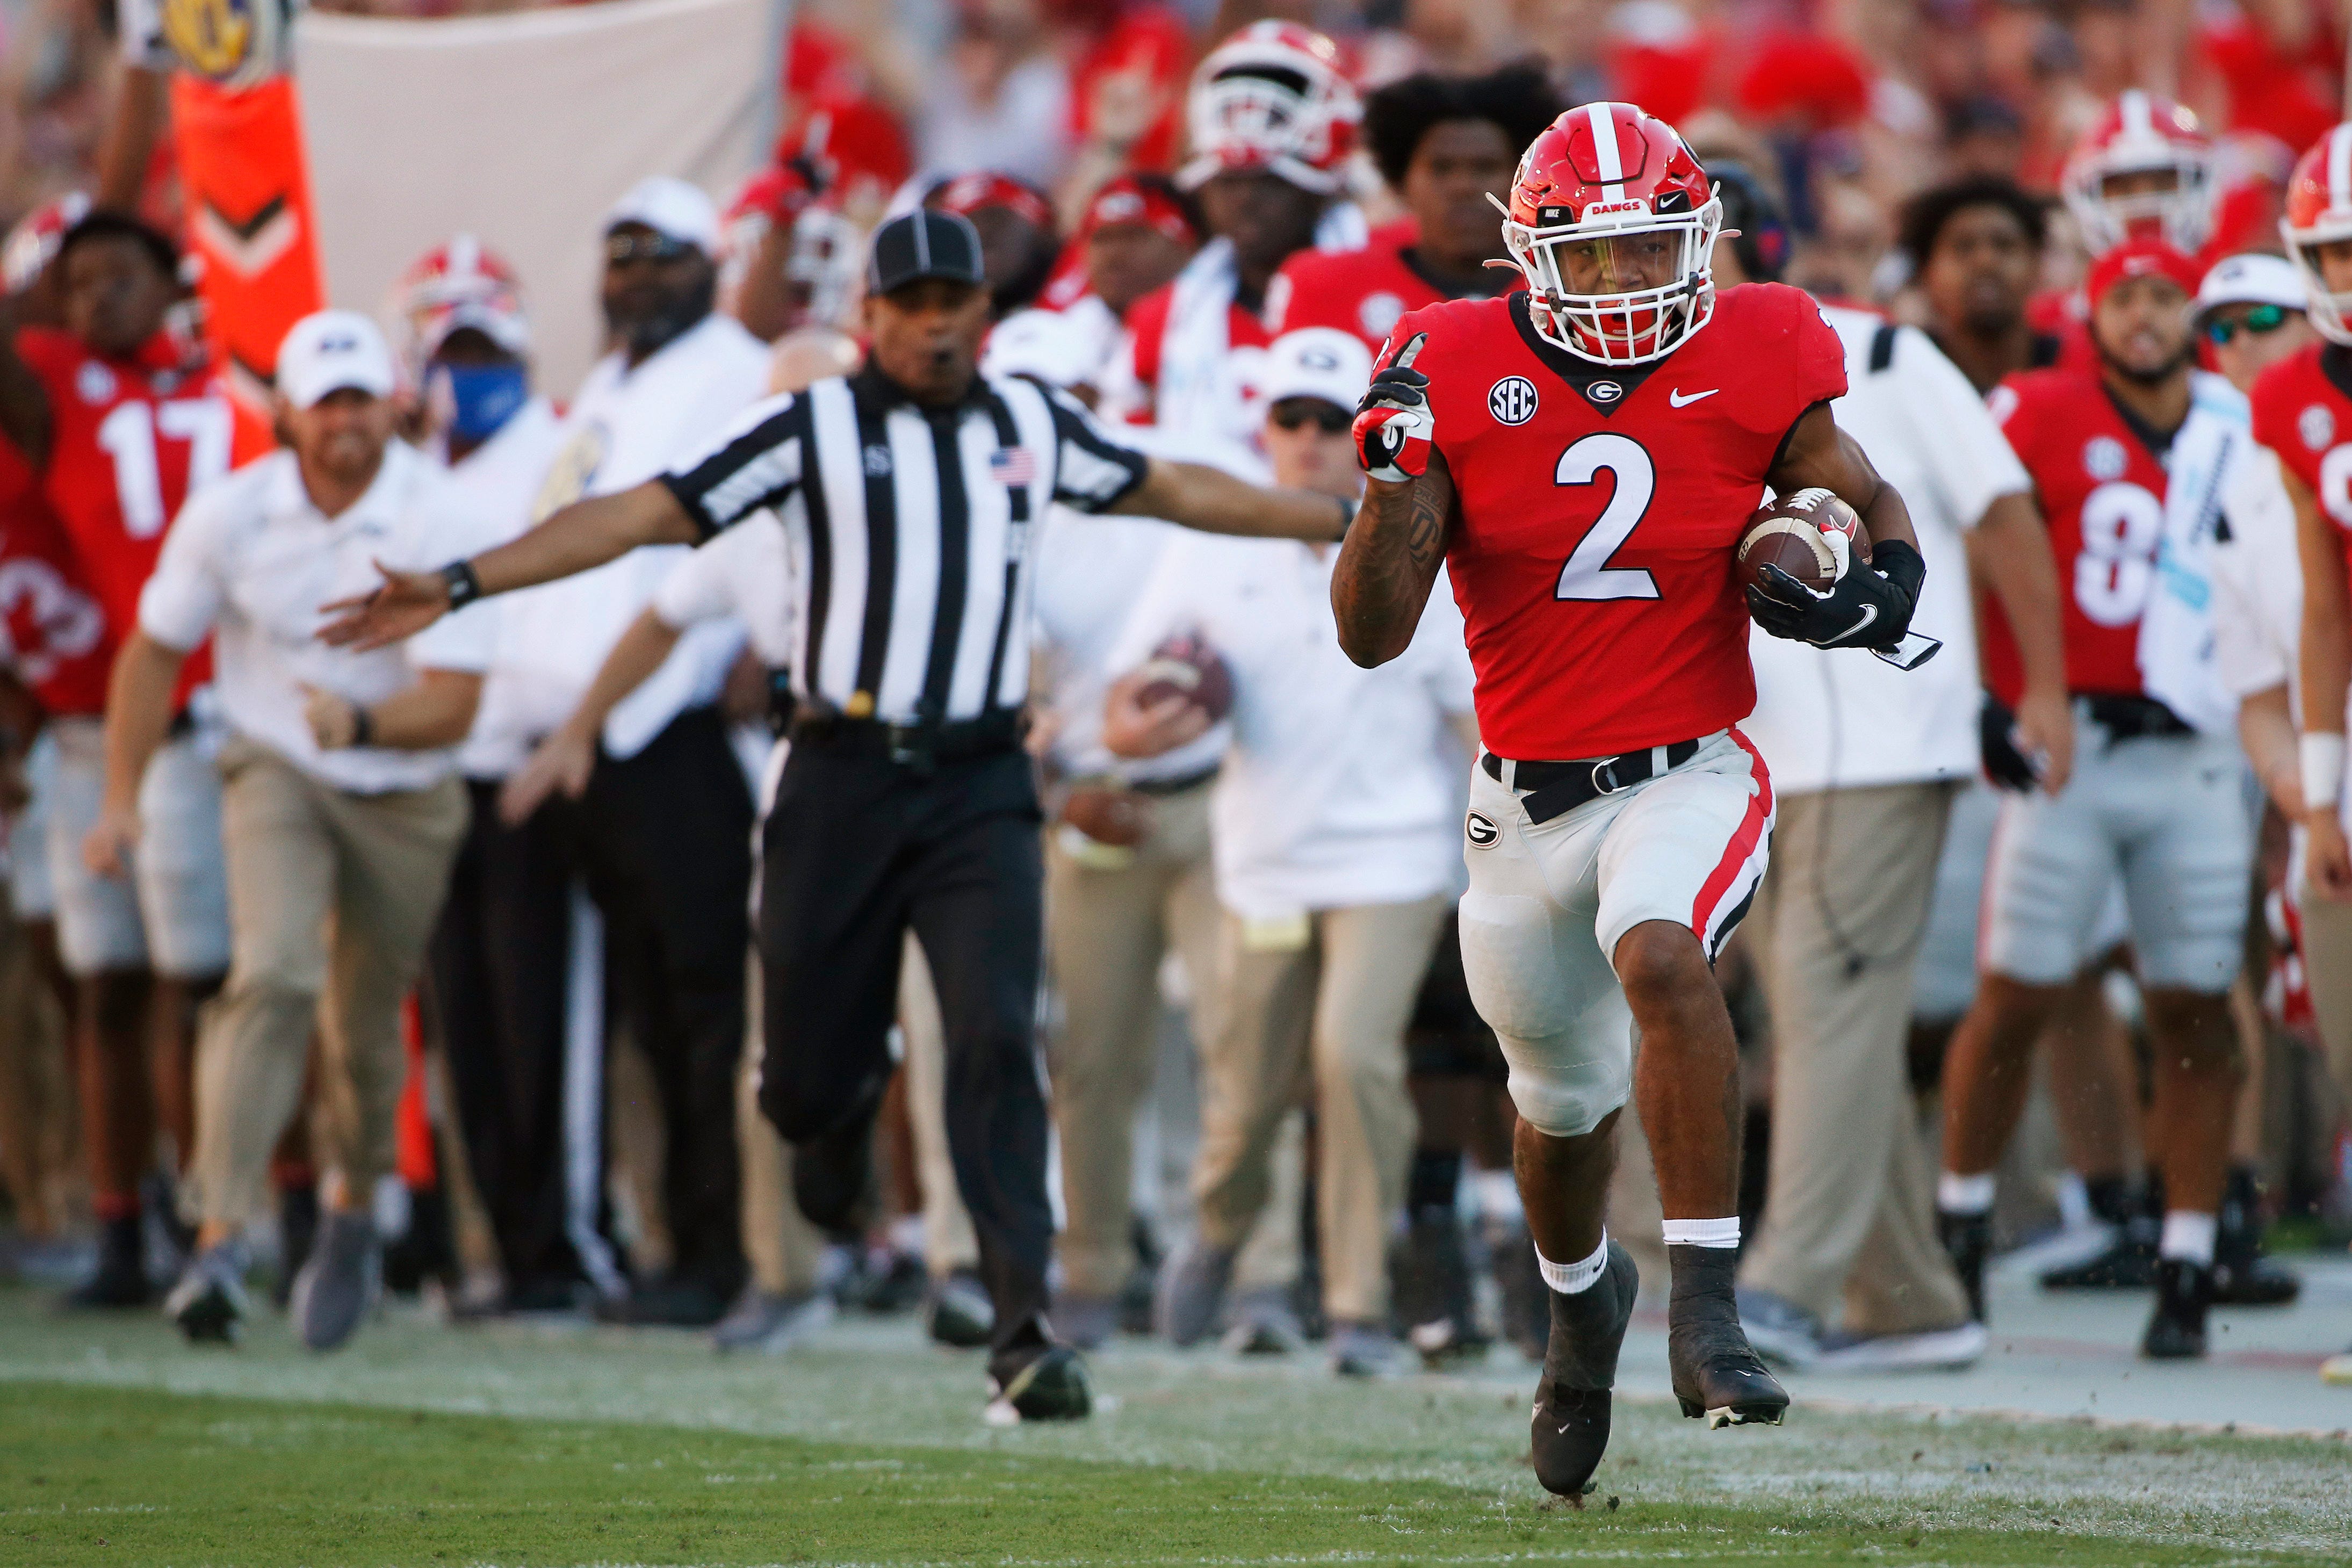 Georgia running back Kendall Milton breaks away down the sideline for a big gain during the first half of an NCAA college football game between Kentucky and Georgia in Athens, Ga., on Saturday, Oct. 16, 2021.